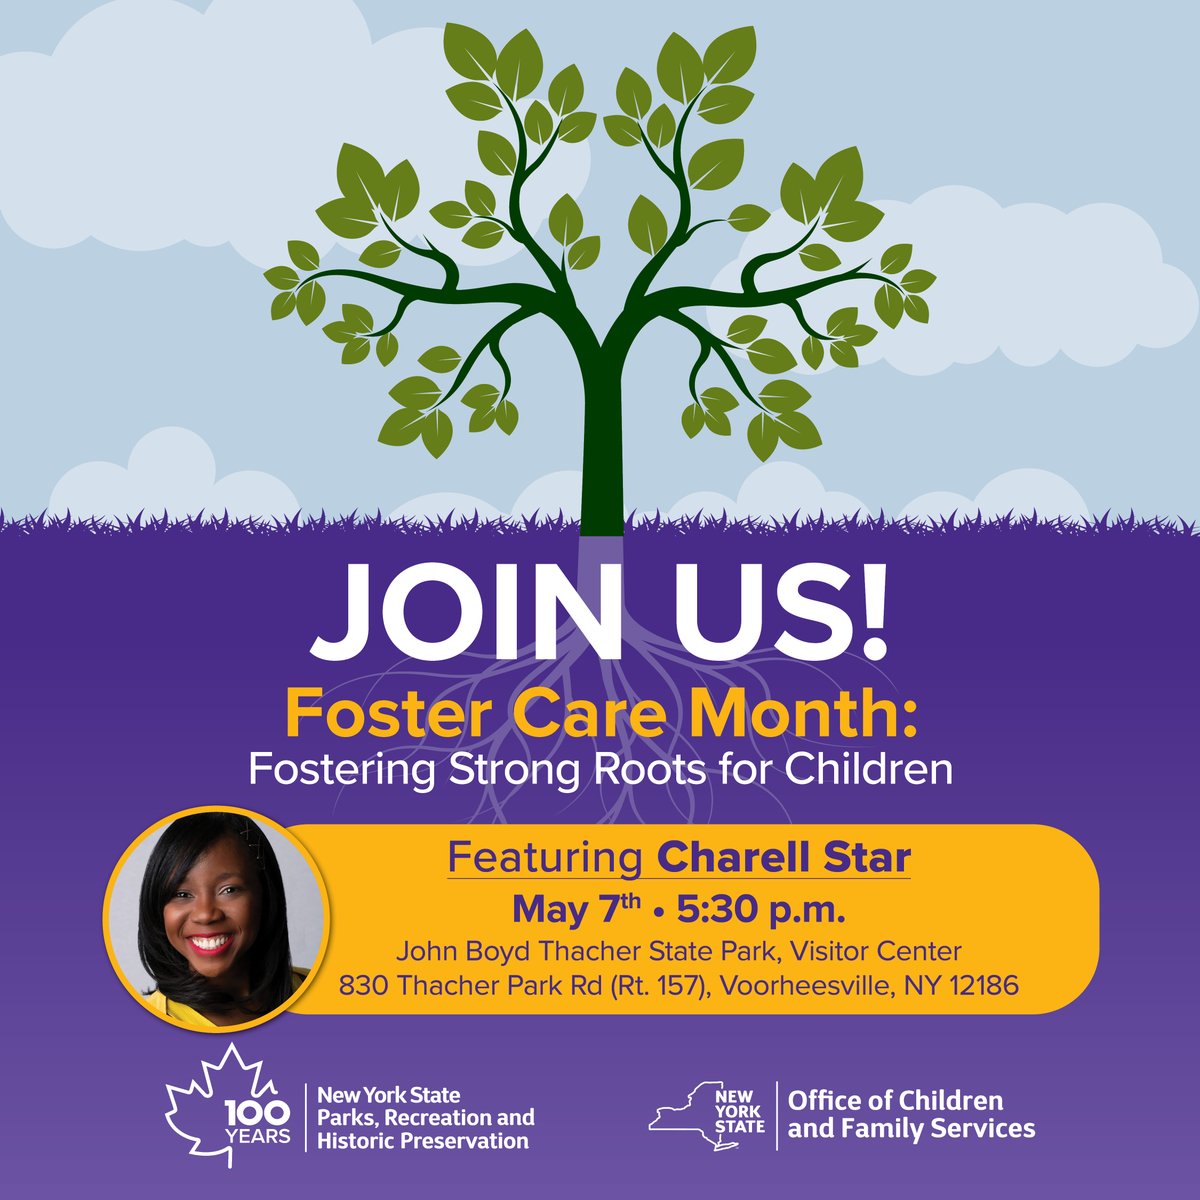 Open your heart and home to children and youth in foster care. Learn how and hear from advocate Charell Star!
#FosteringStrongRoots #FosterCareMonth